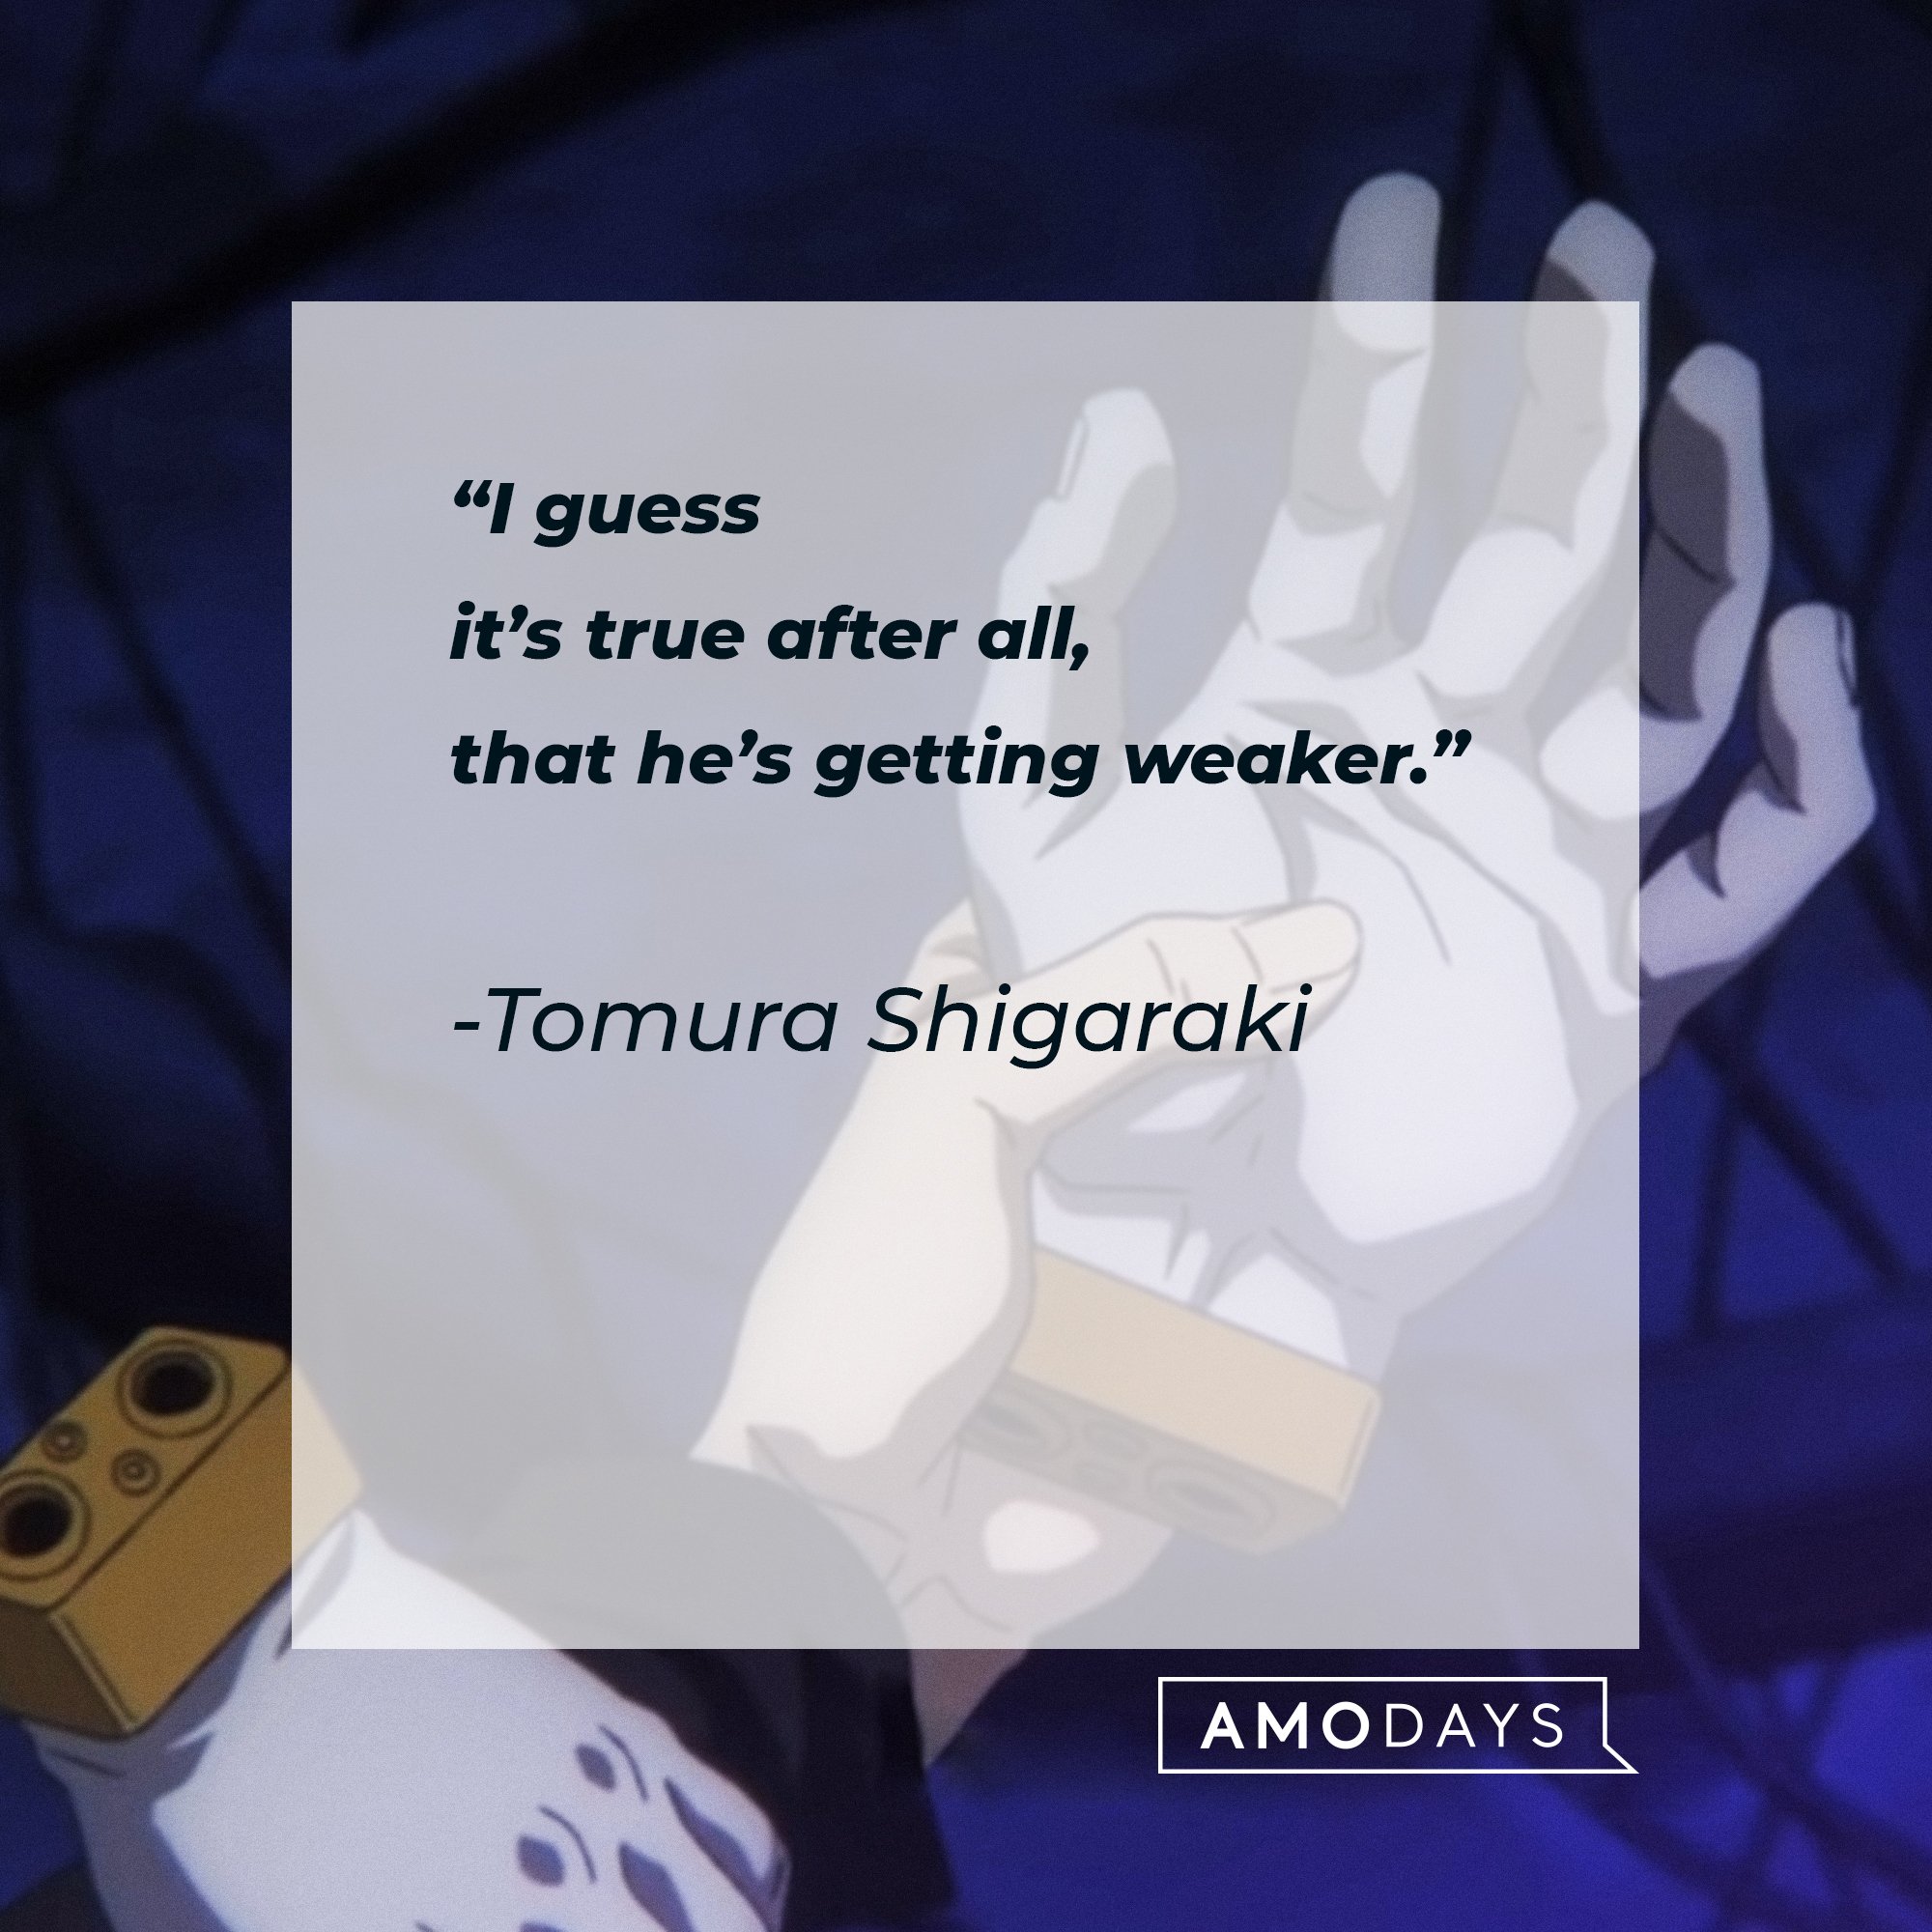 Tomura Shigaraki’s quote:"I guess it's true after all, that he's getting weaker." | Image: AmoDays